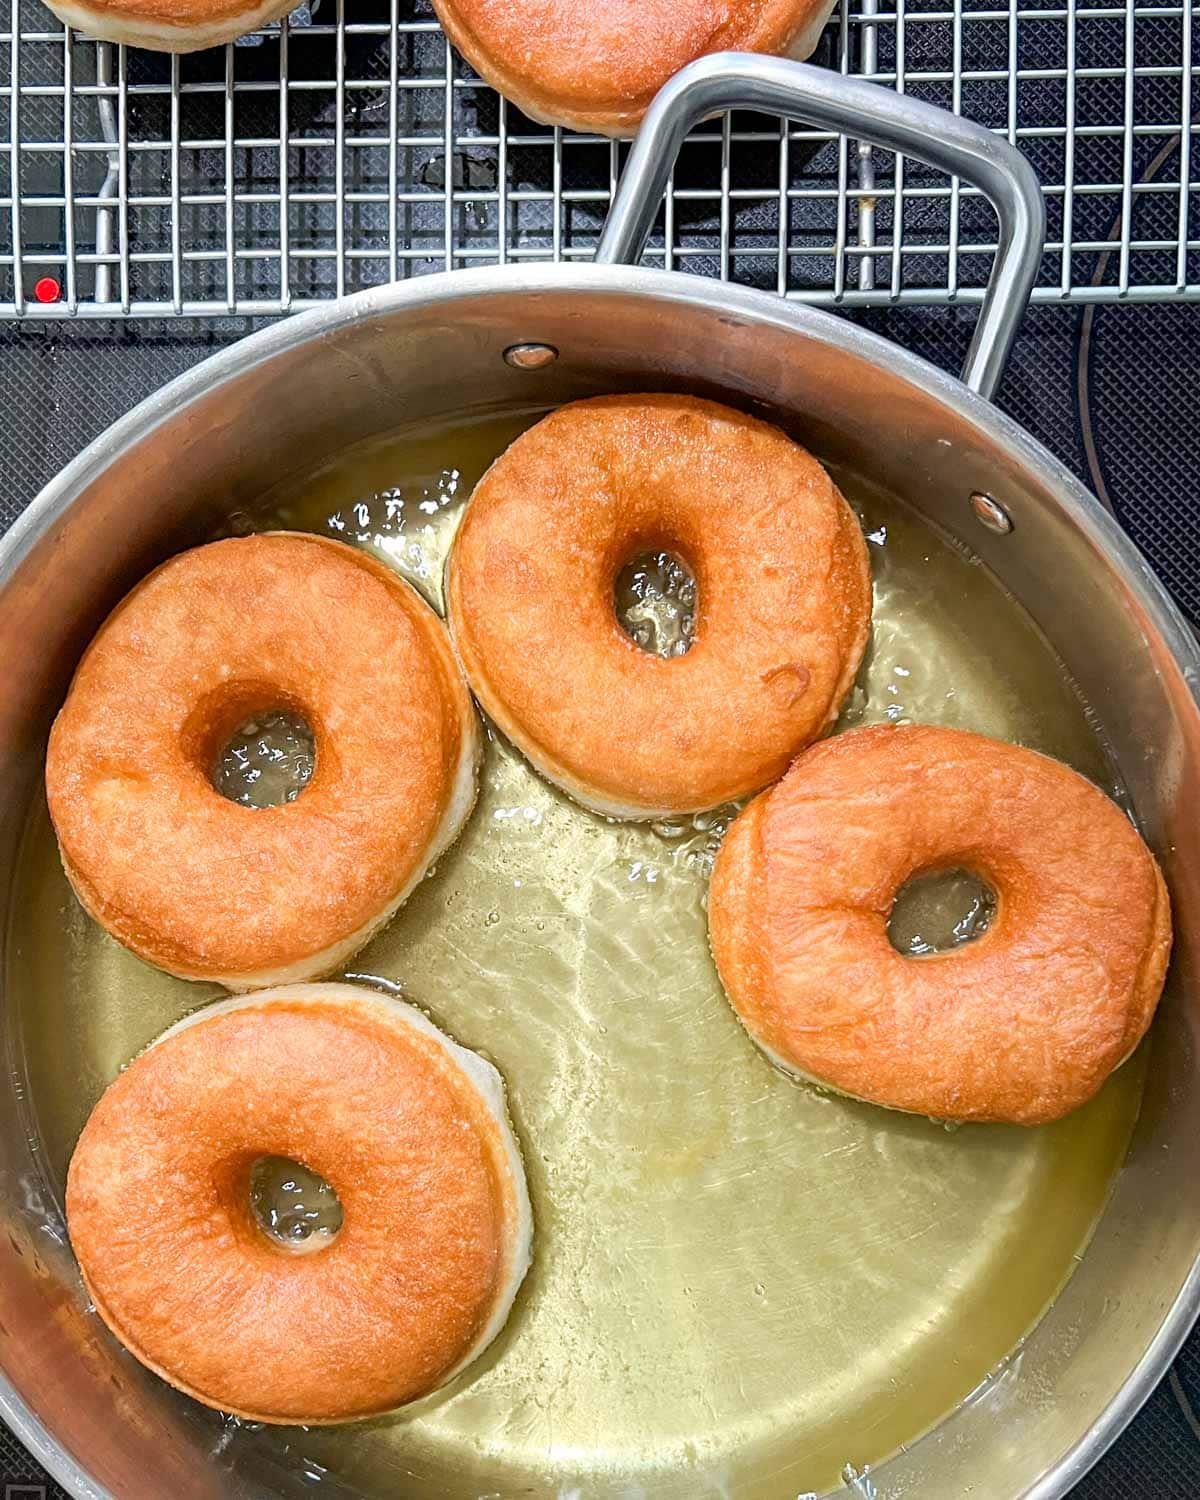 yeast donuts frying in oil in a skillet